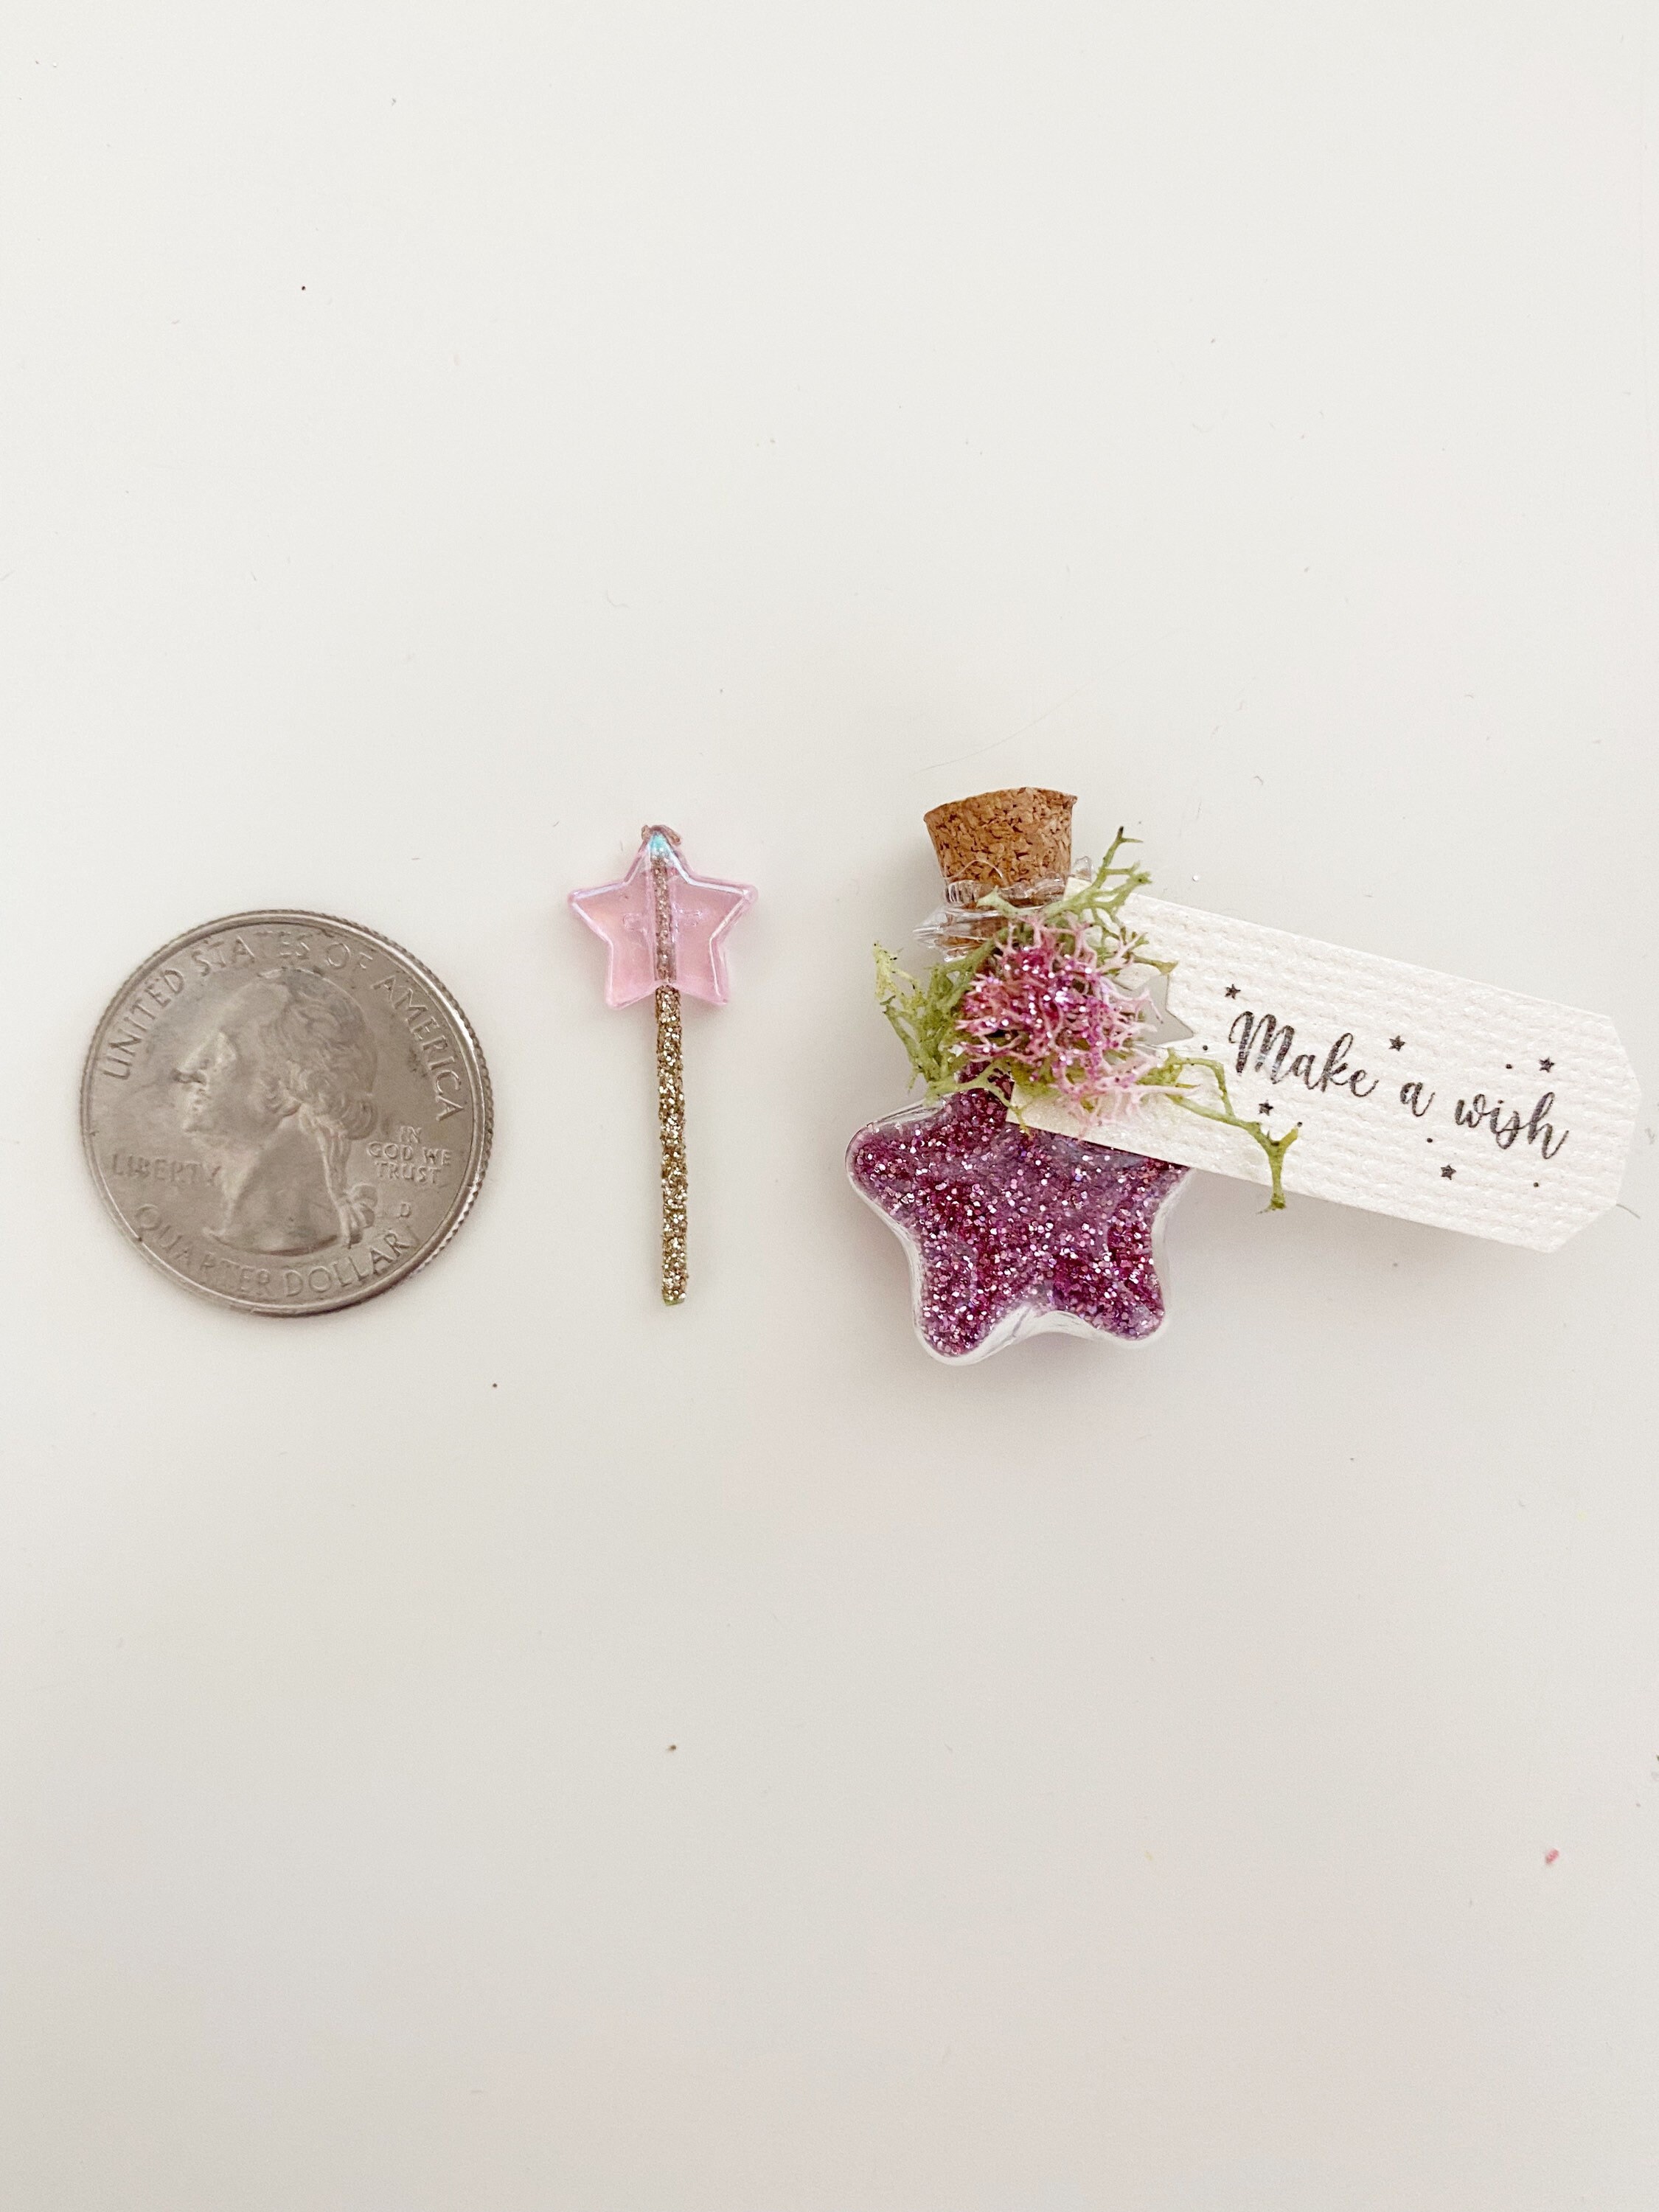 Pixie Dust Bottle and Wand Set by Wands and Willows, Star Shaped